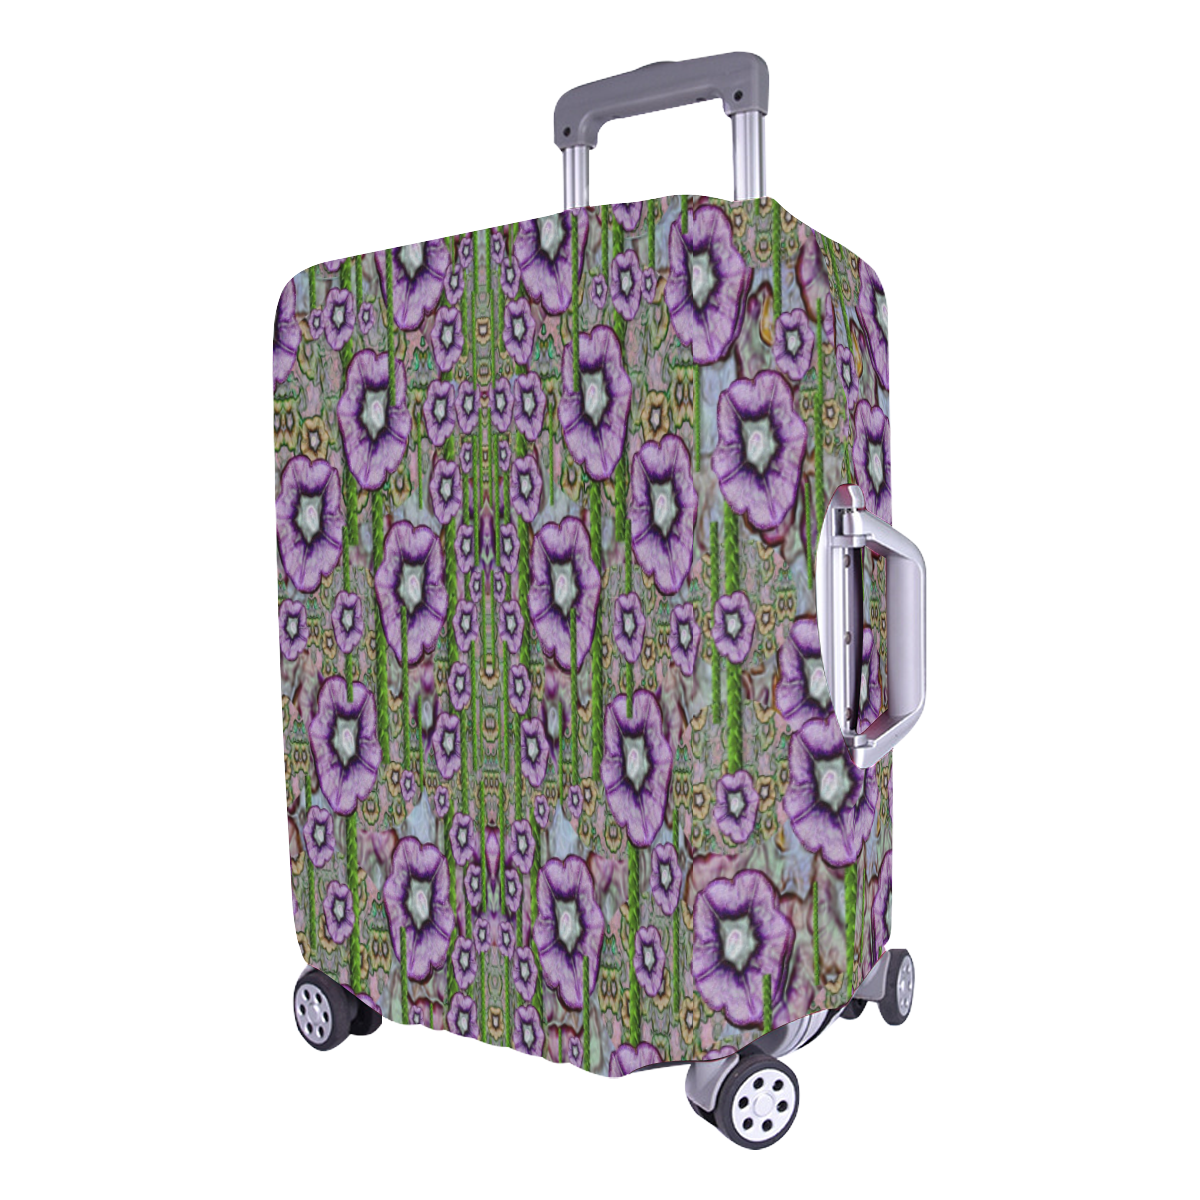 Jungle fantasy flowers climbing to be in freedom Luggage Cover/Large 26"-28"